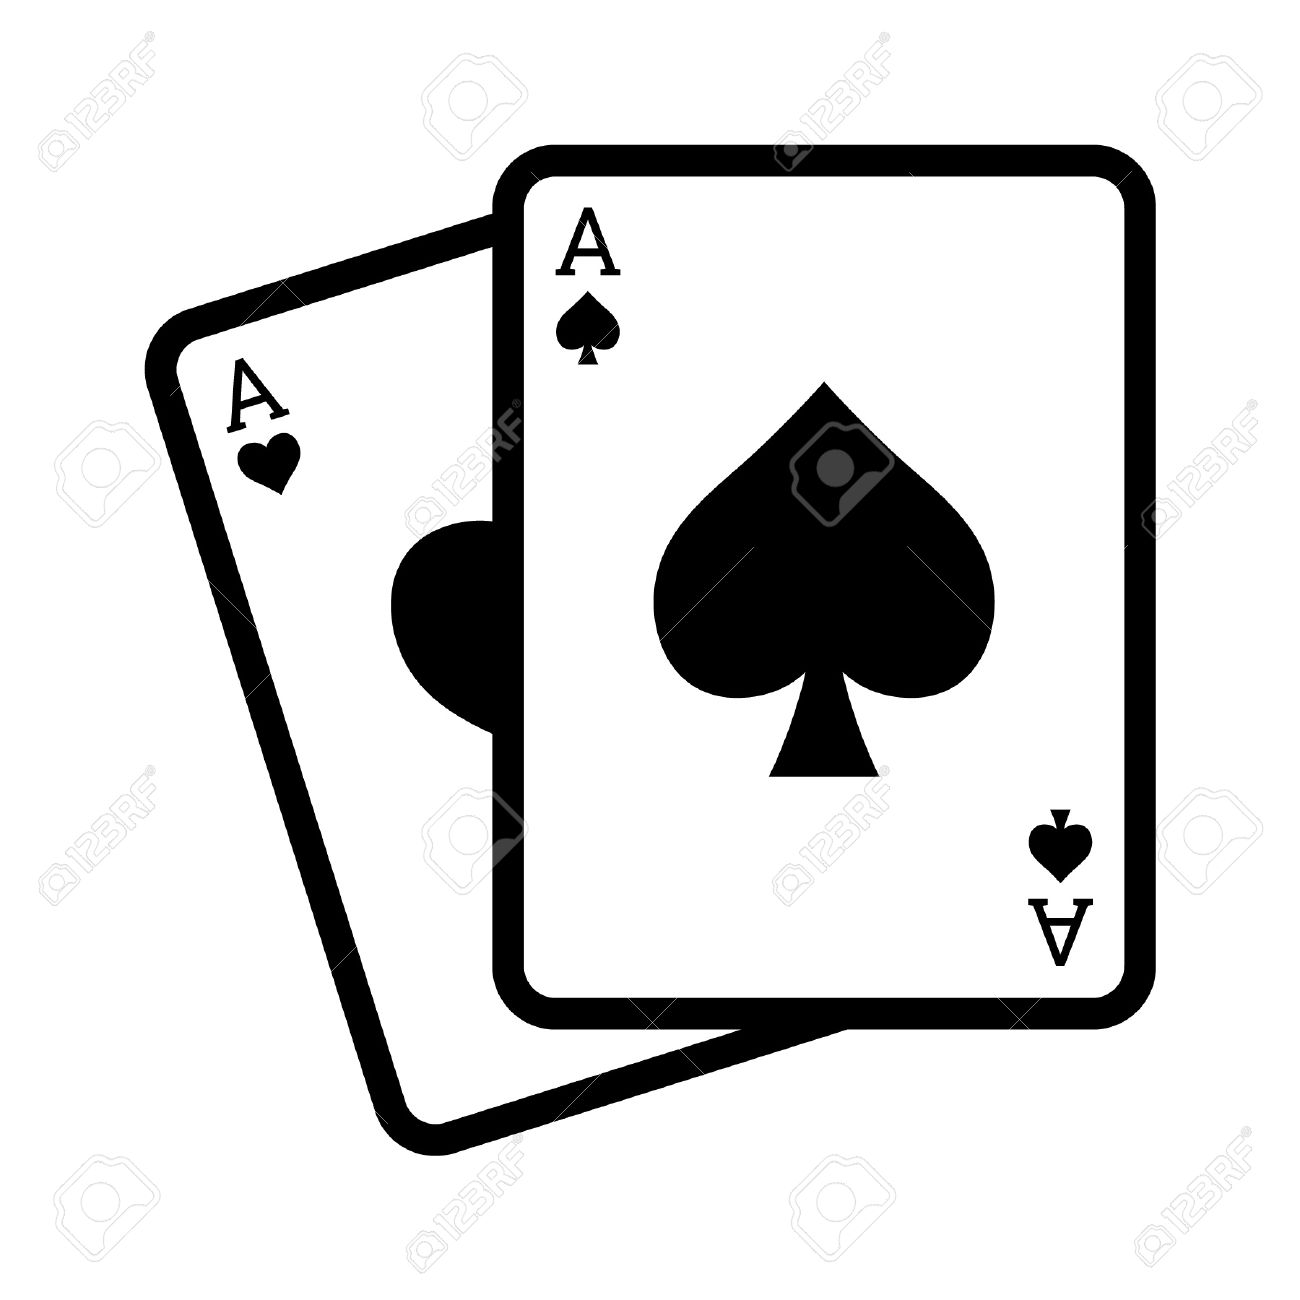 Blackjack poker cards with aces line art icon Stock Vector - 42411251